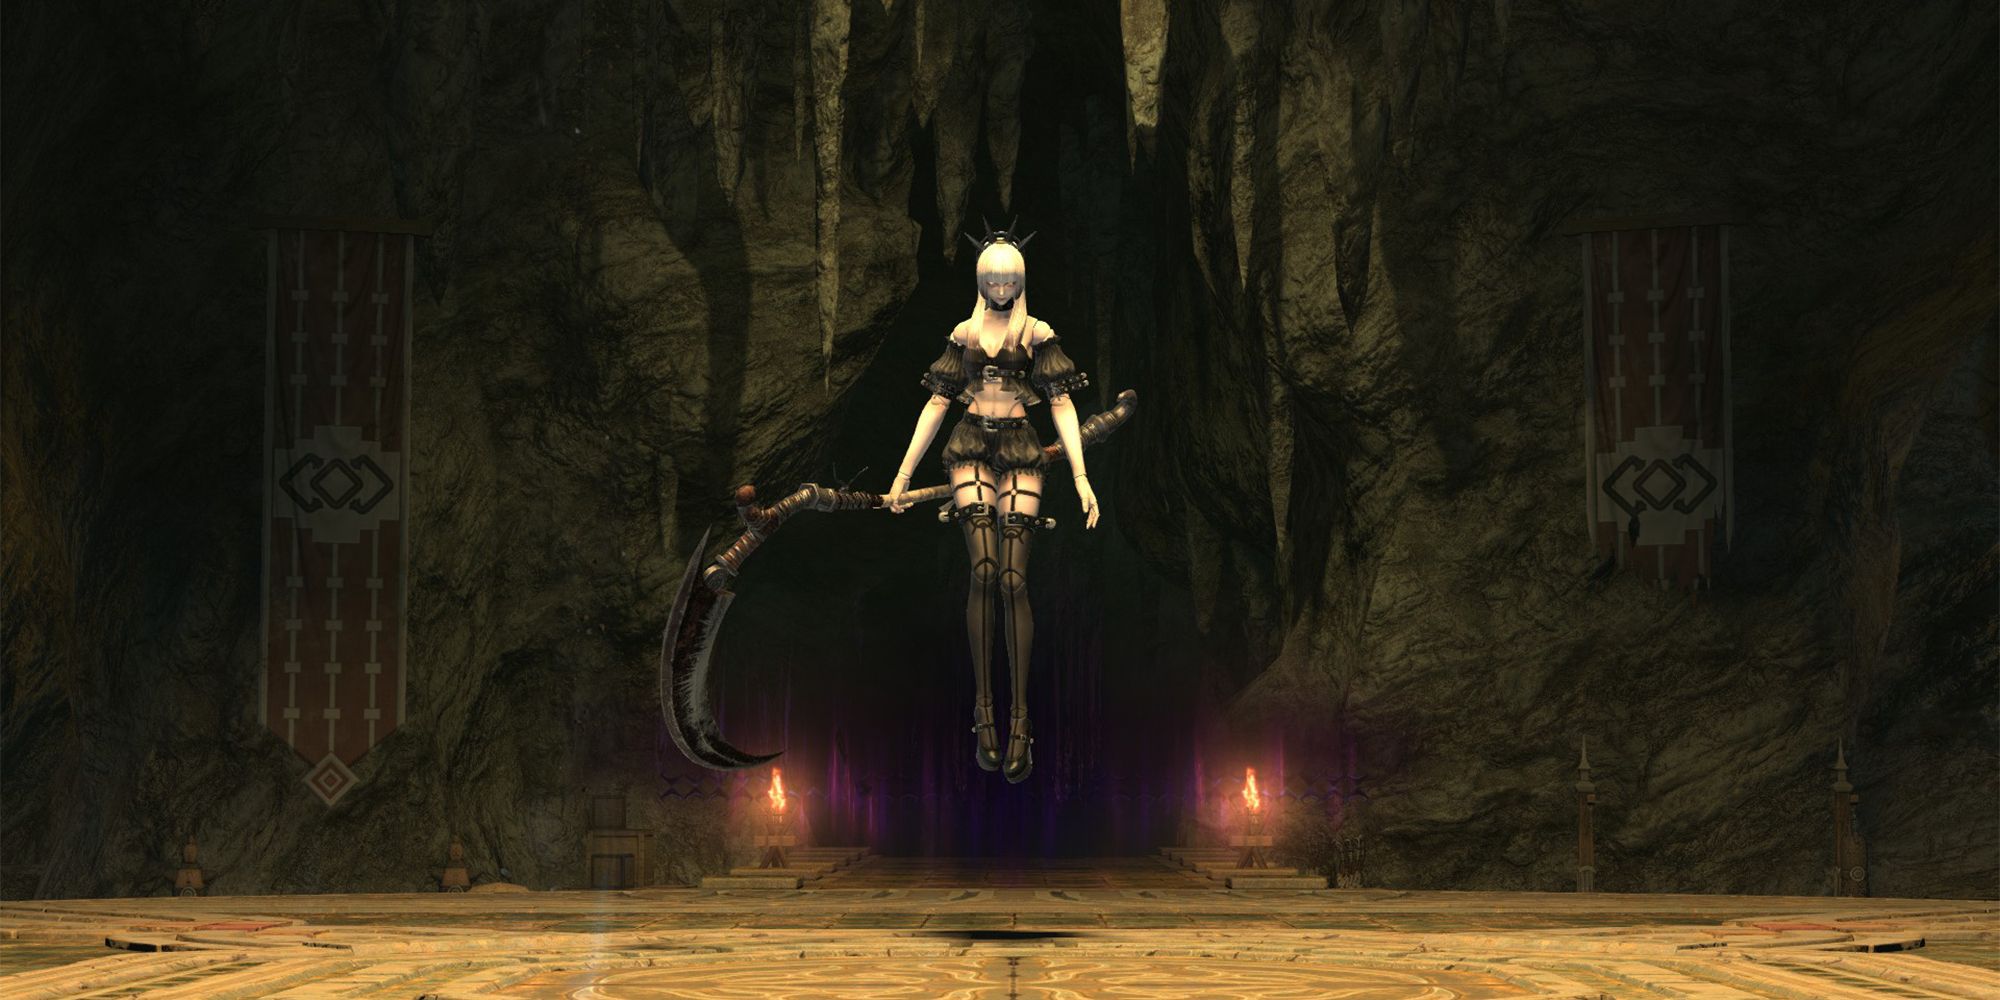 galatea magna, second boss of lapis manalis dungeon. a floating doll holding a reaper's scythe